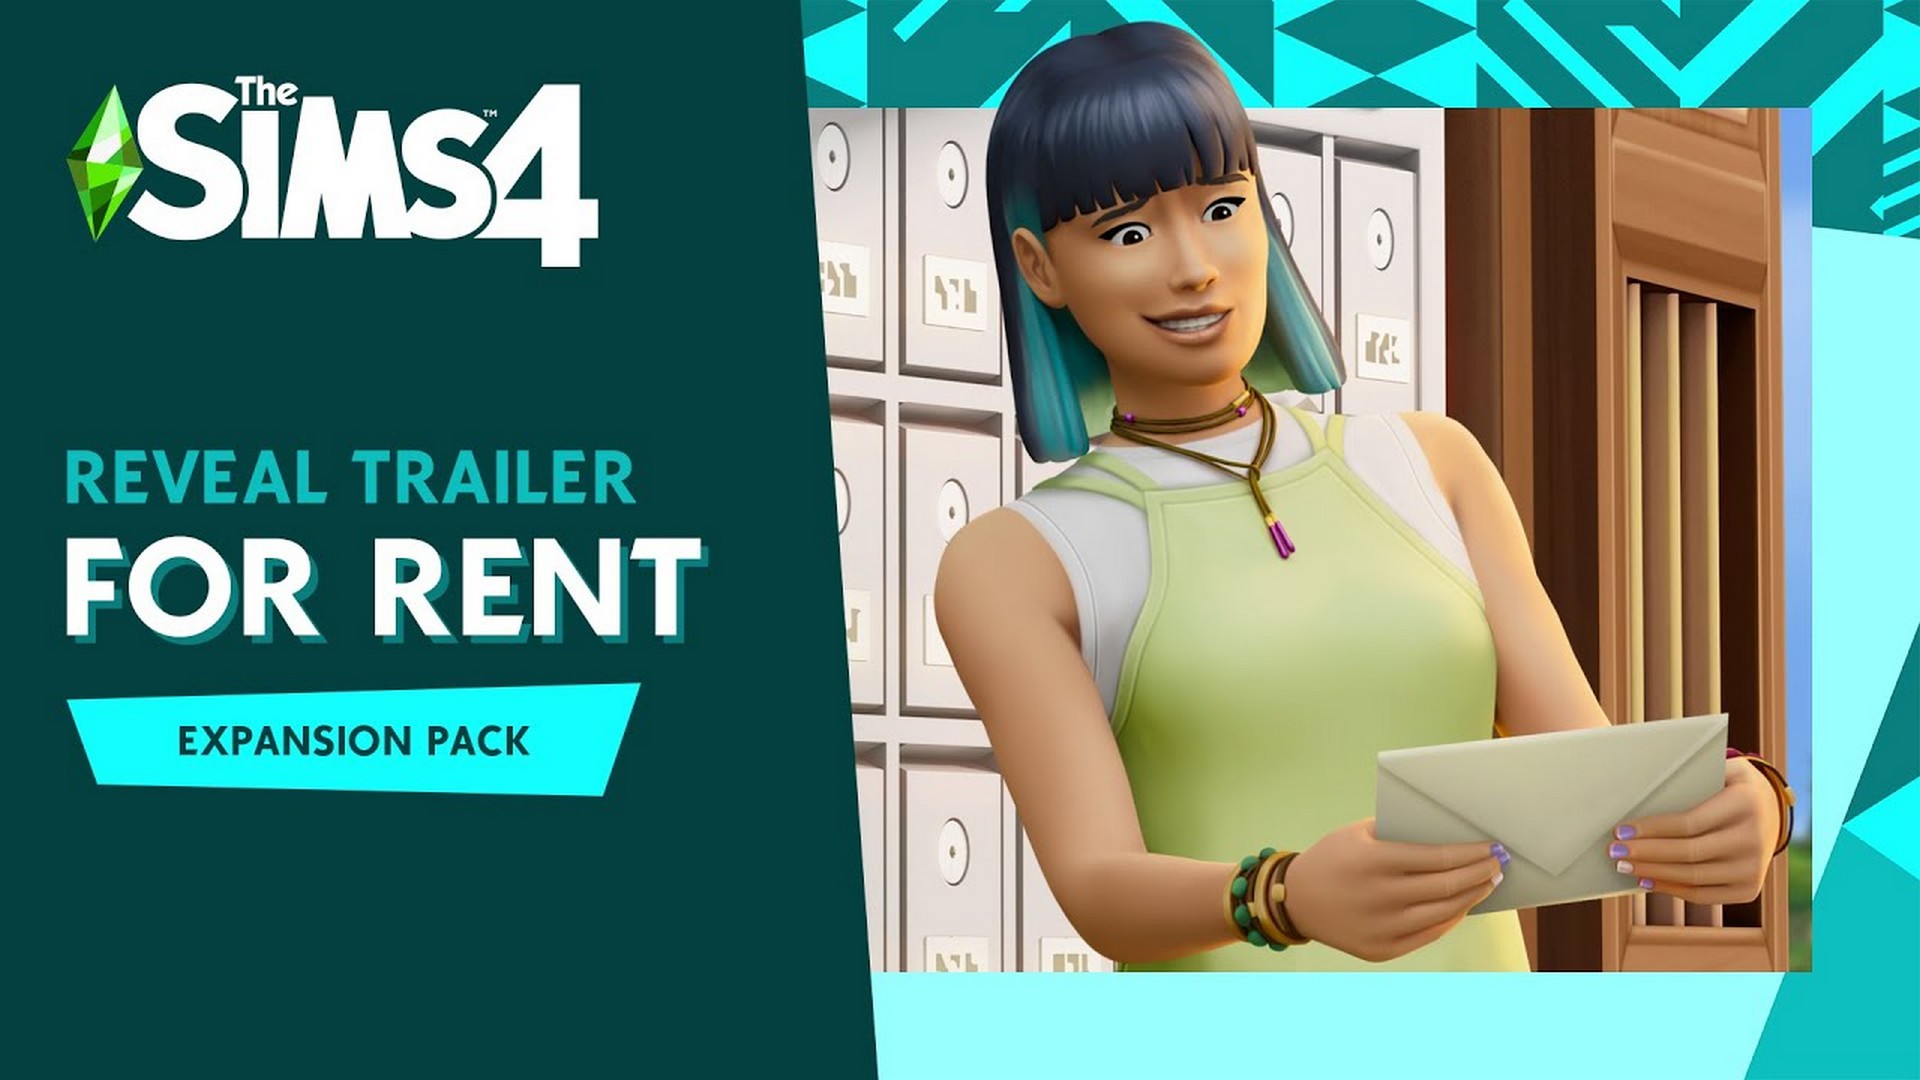 The Sims 4 Reveals The For Rent Expansion Pack – Available December 8